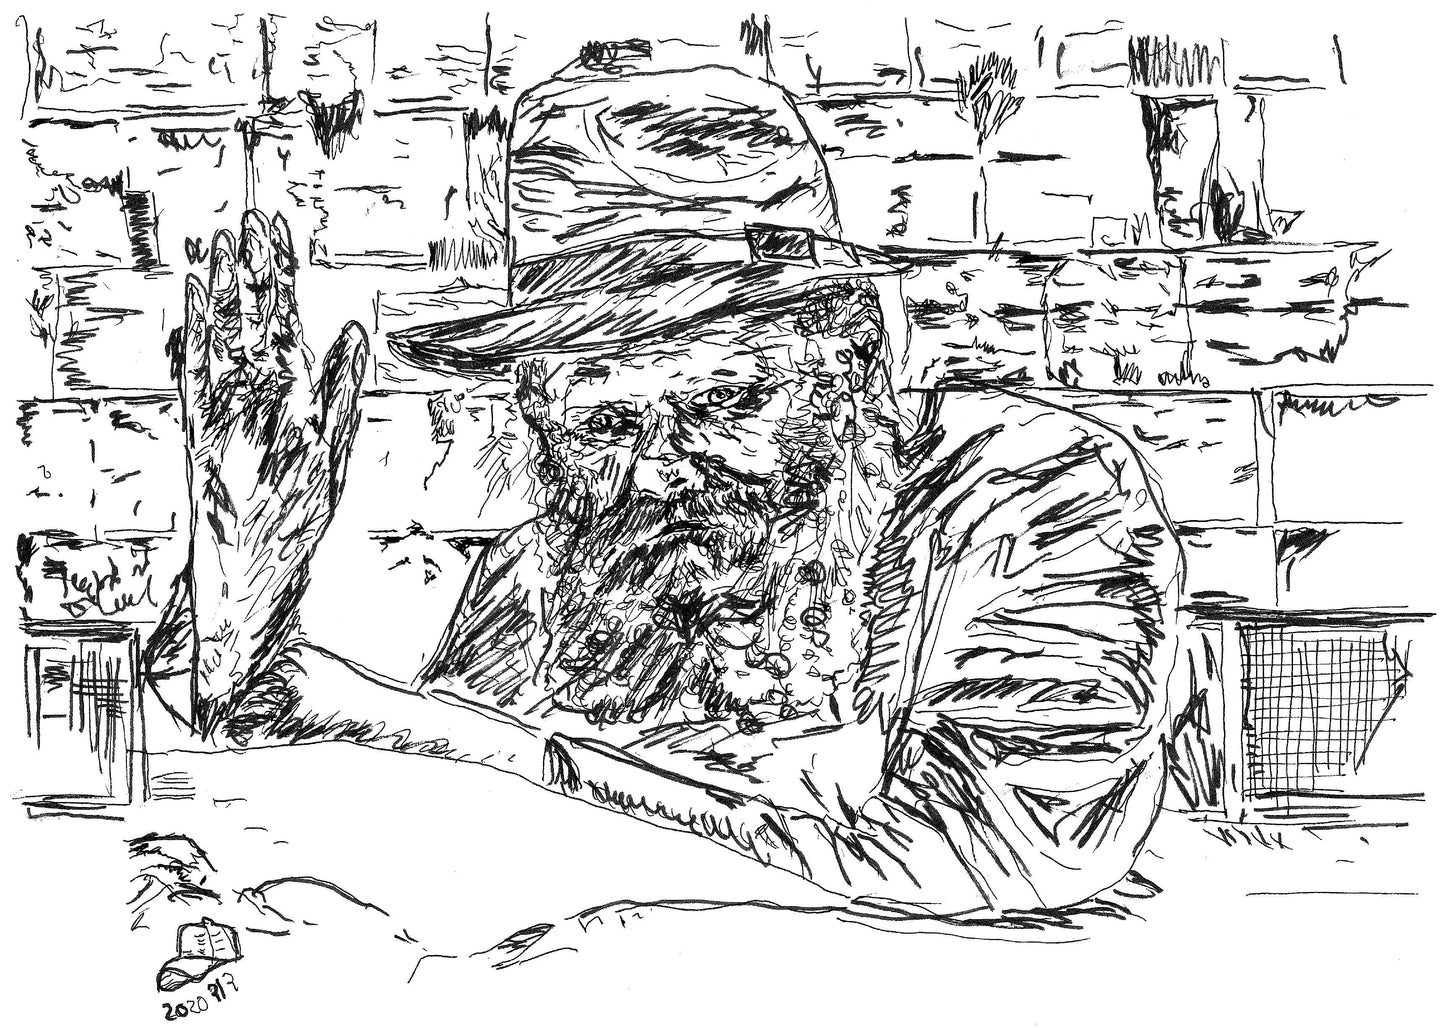 ART PRINT LIMITED THE REBBE FROM NEW YORK CITY